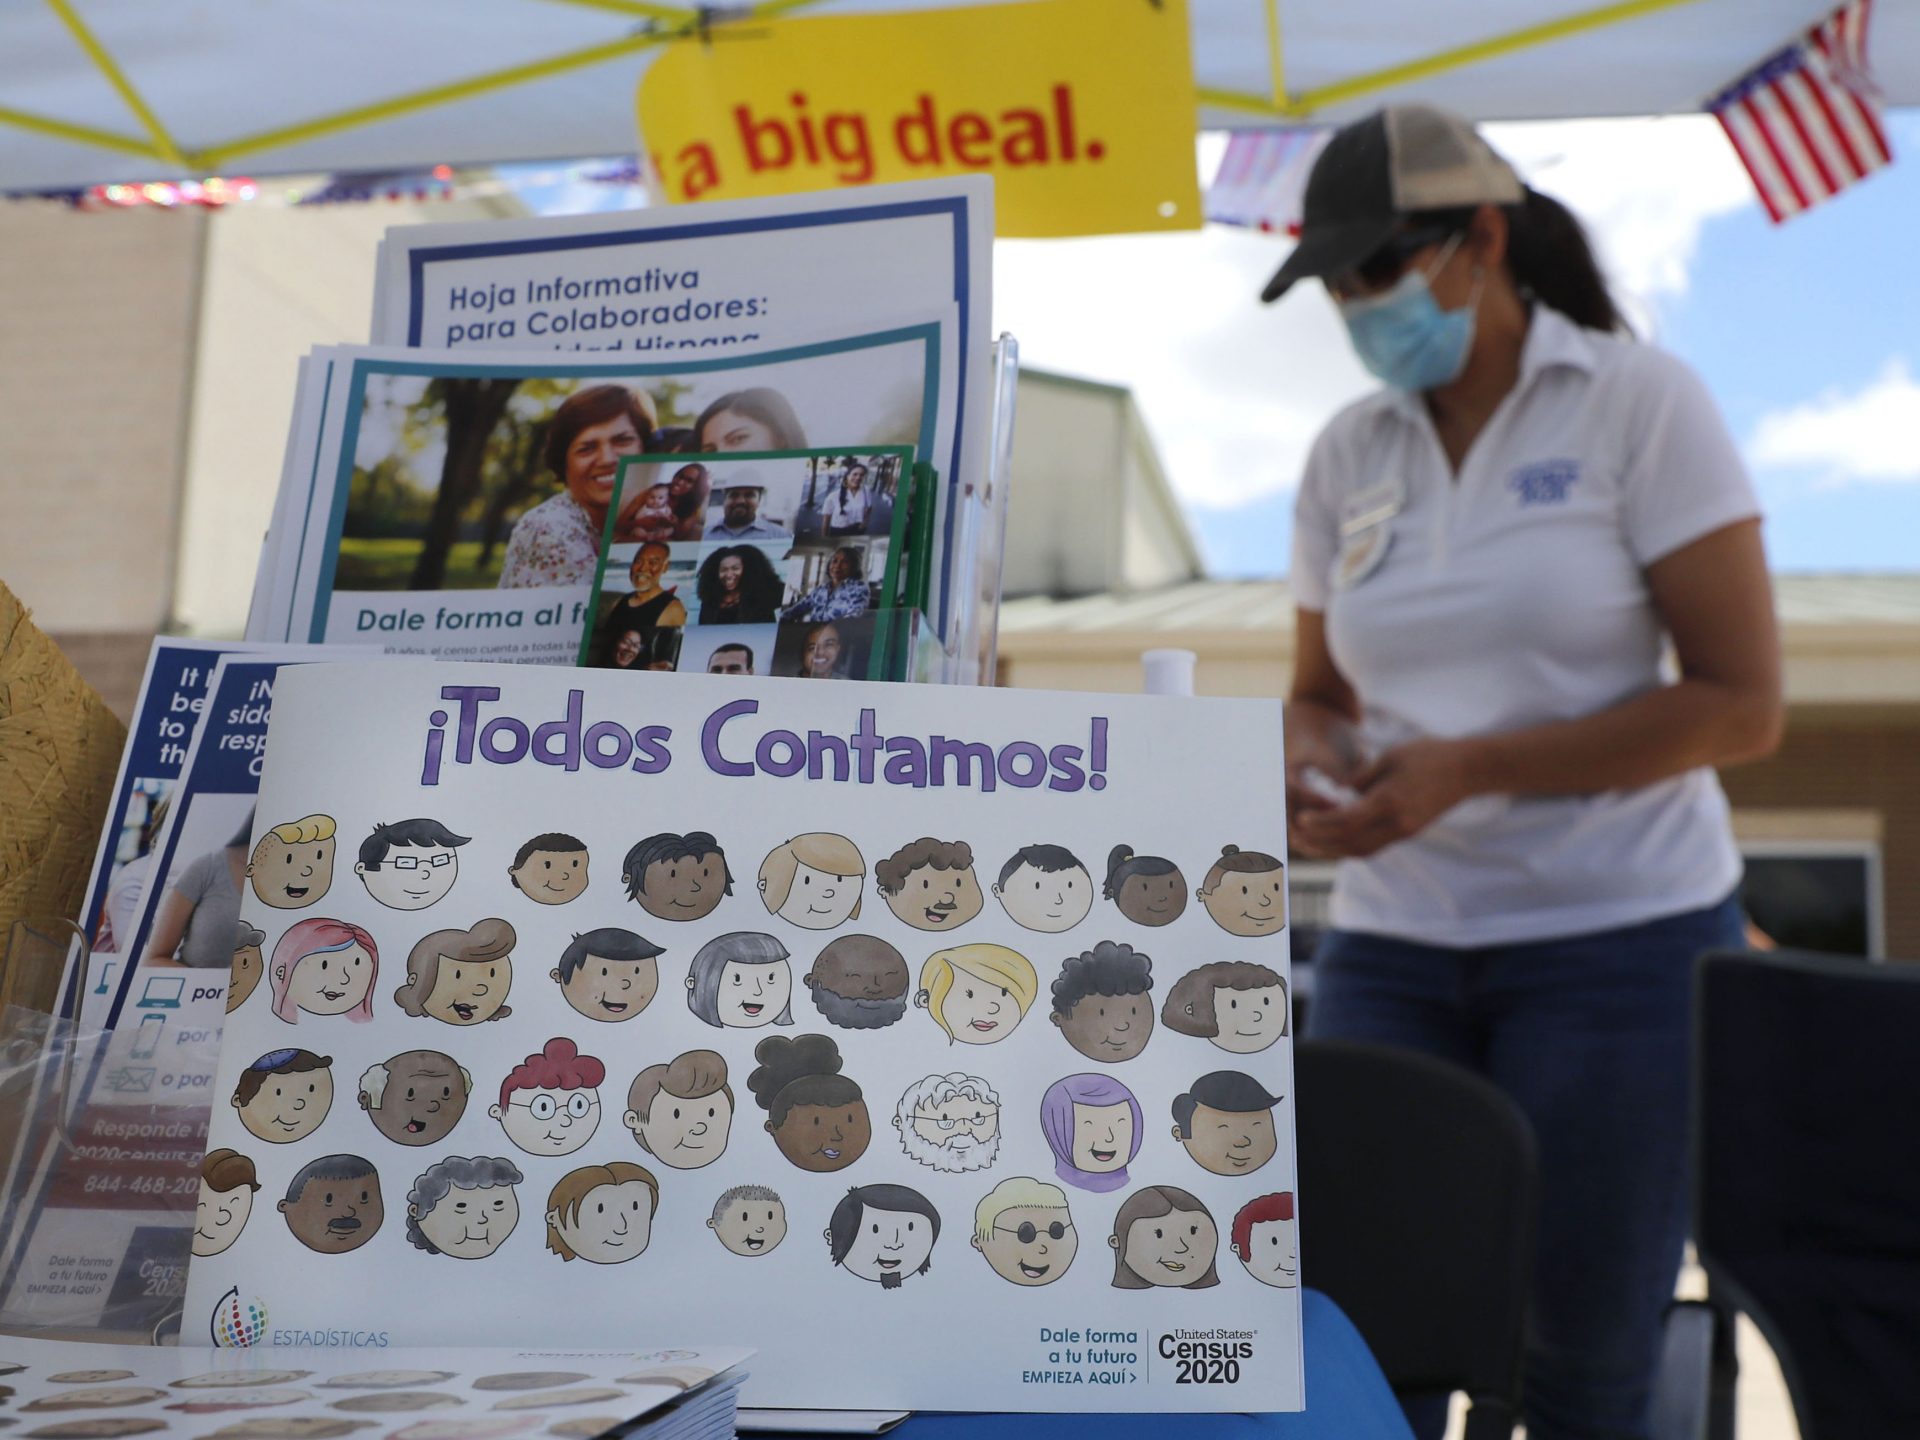 A children's book is displayed at a U.S. Census walk-up counting site set up for Hunt County in Greenville, Texas, Friday, July 31, 2020.